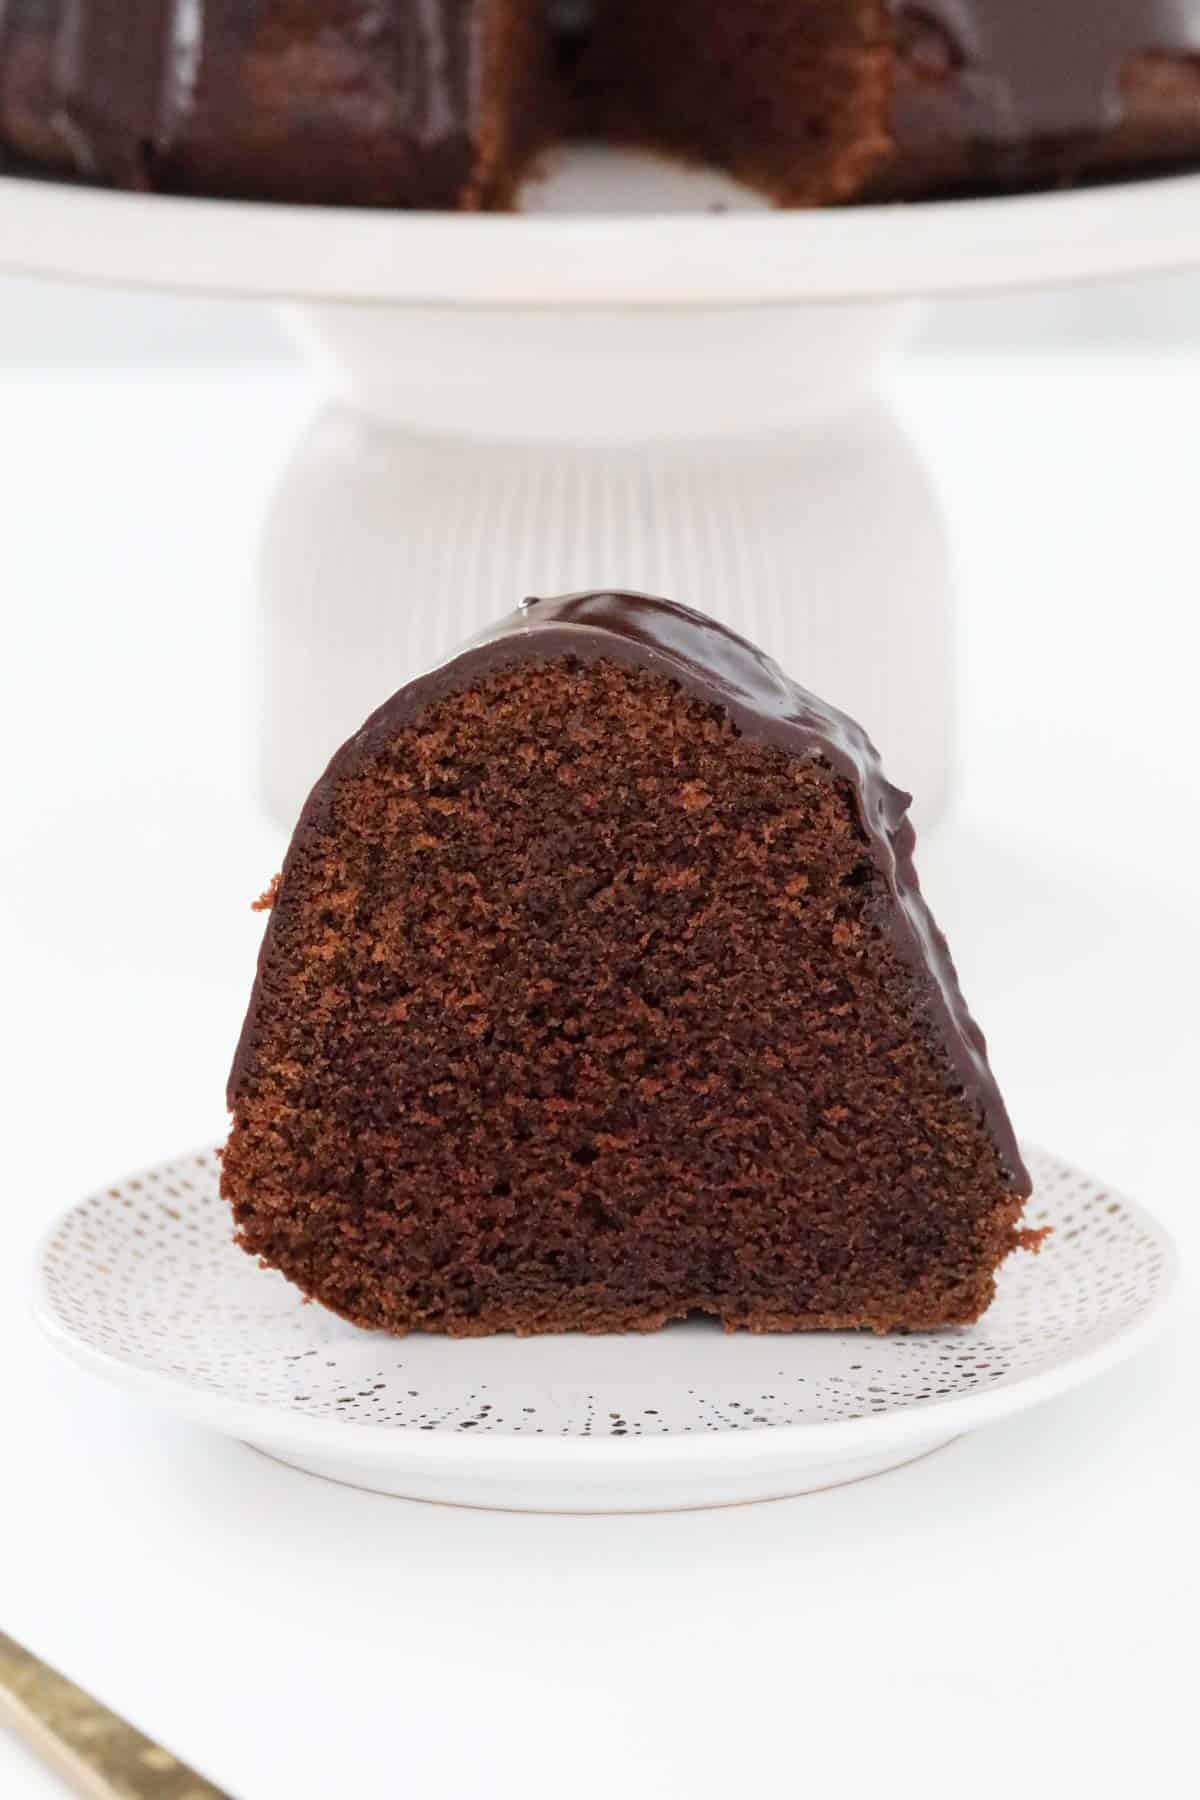 A slice of sour cream chocolate cake on a plate to show the texture of the cake.